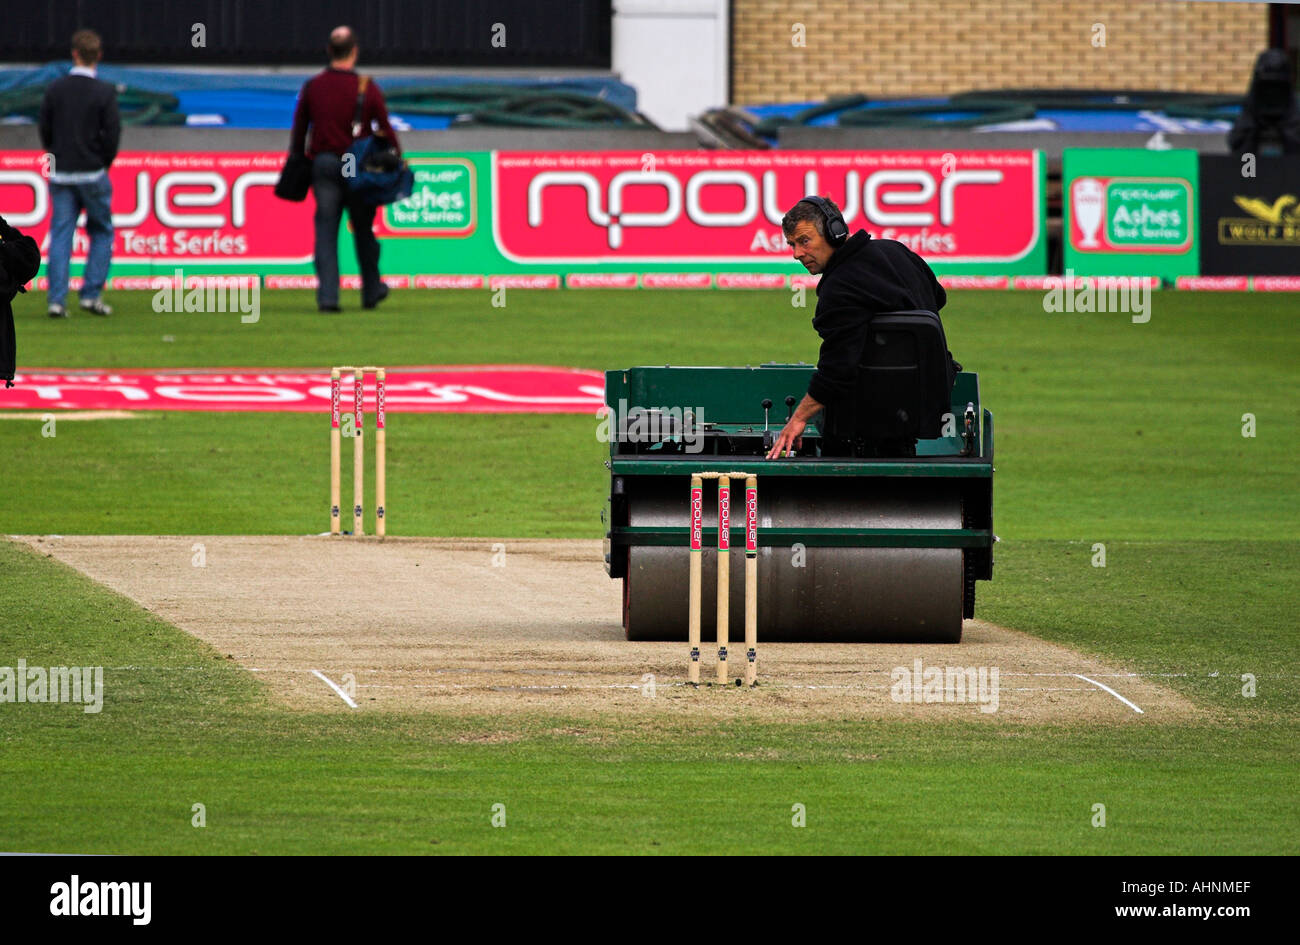 Man rolling the cricket pitch in preparation for a game, England Stock Photo